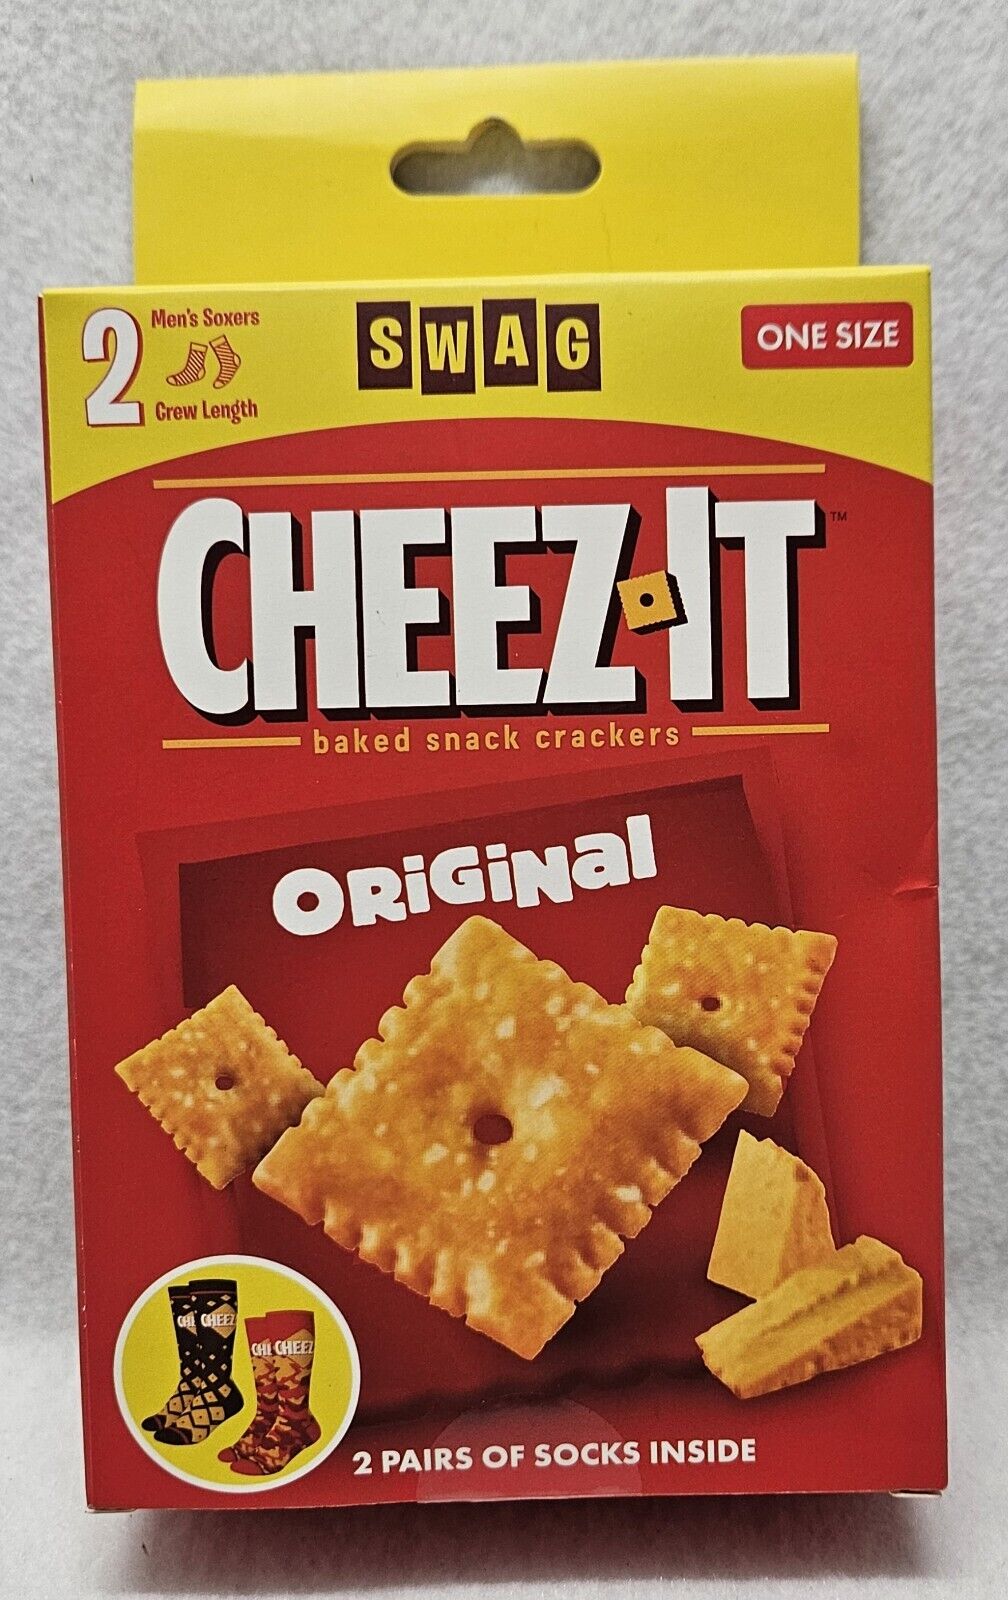 SWAG Cheez-It 2 Pairs Of Crew Length Men\'s Soxers One Size/New